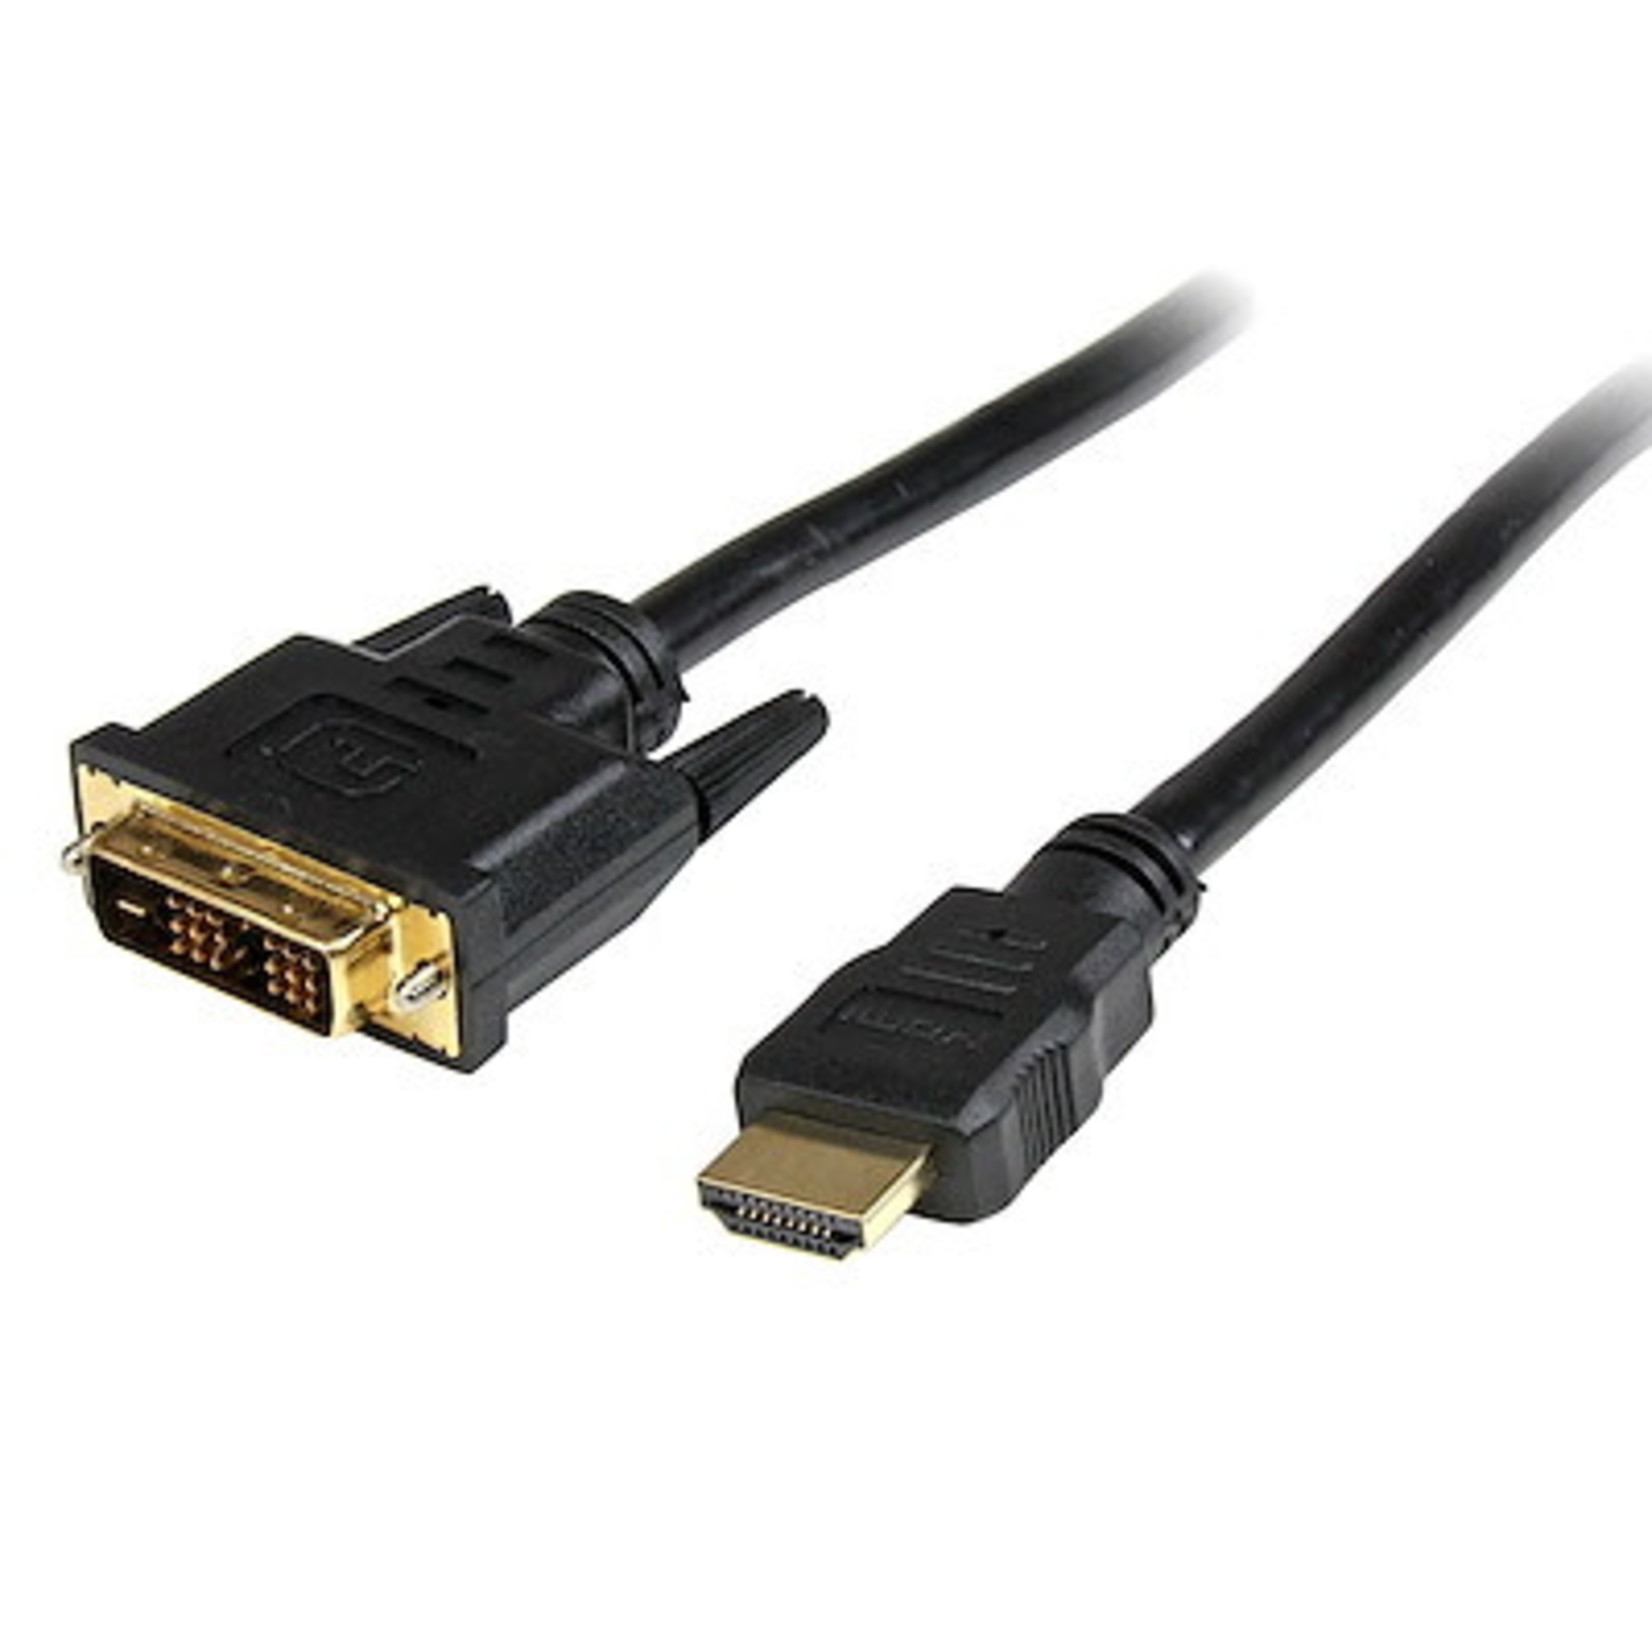 Startech 6 ft HDMI to DVI Multimedia Cable